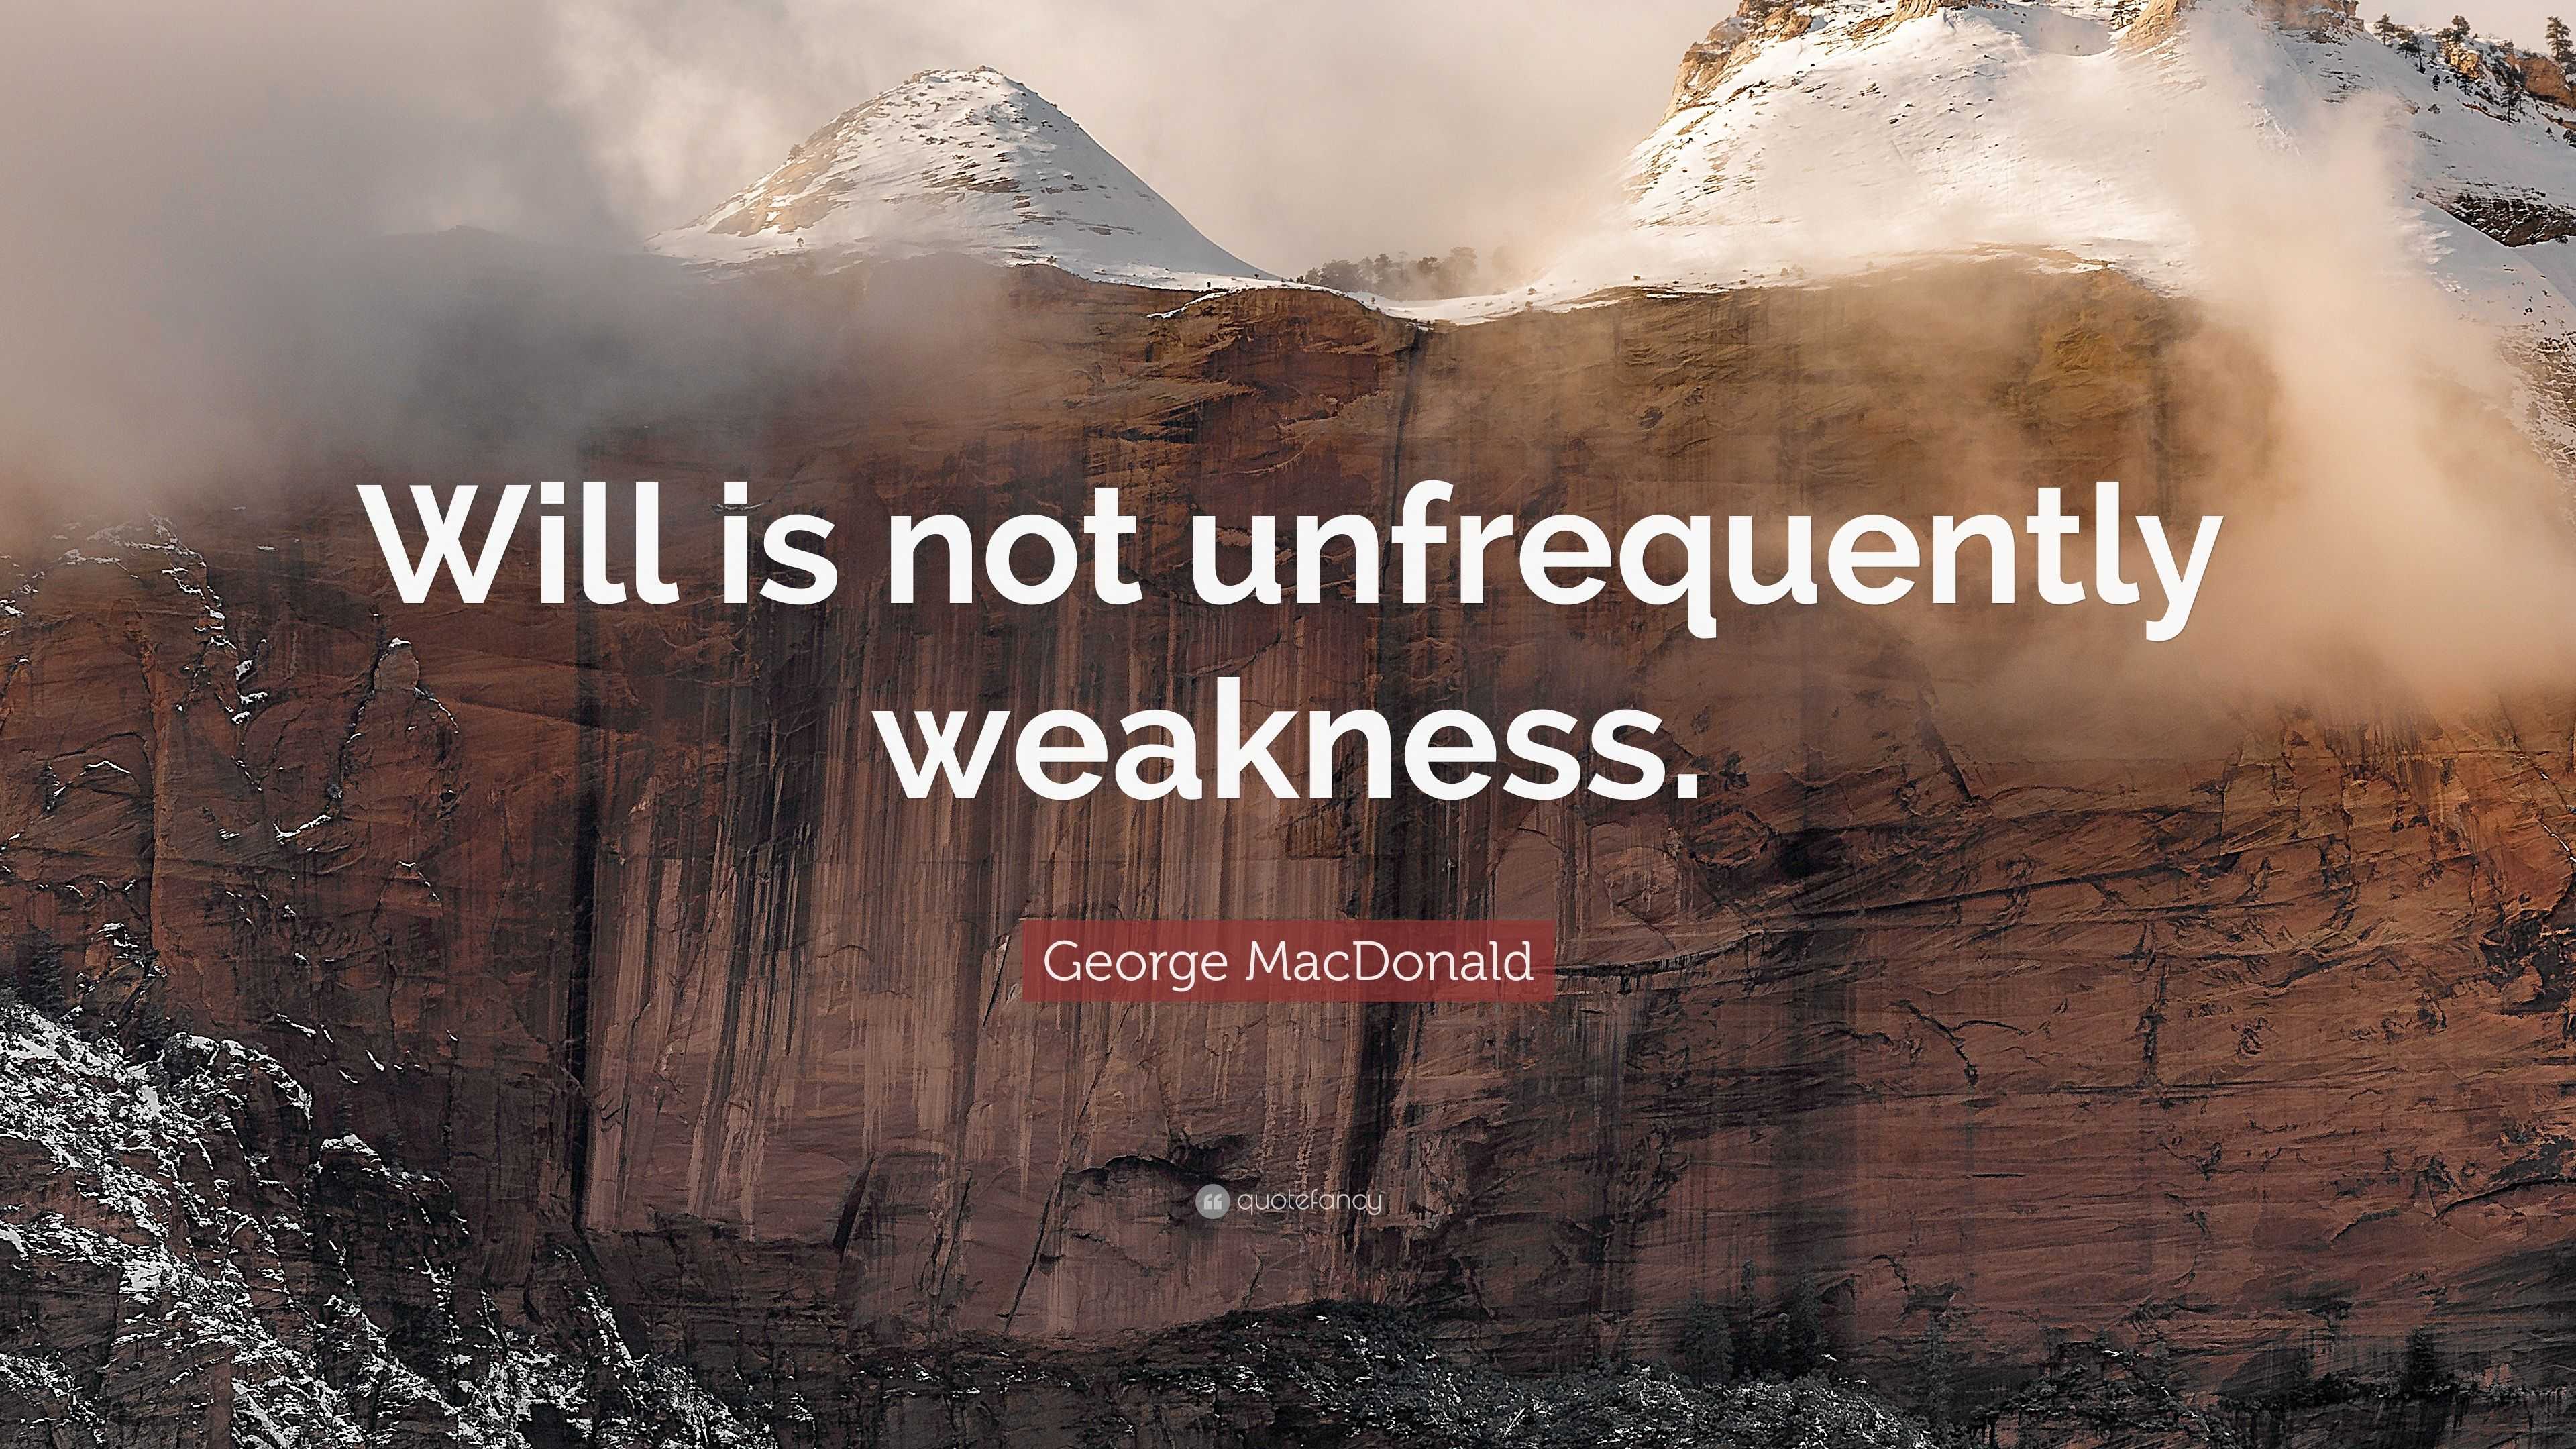 George MacDonald Quote: “Will is not unfrequently weakness.”